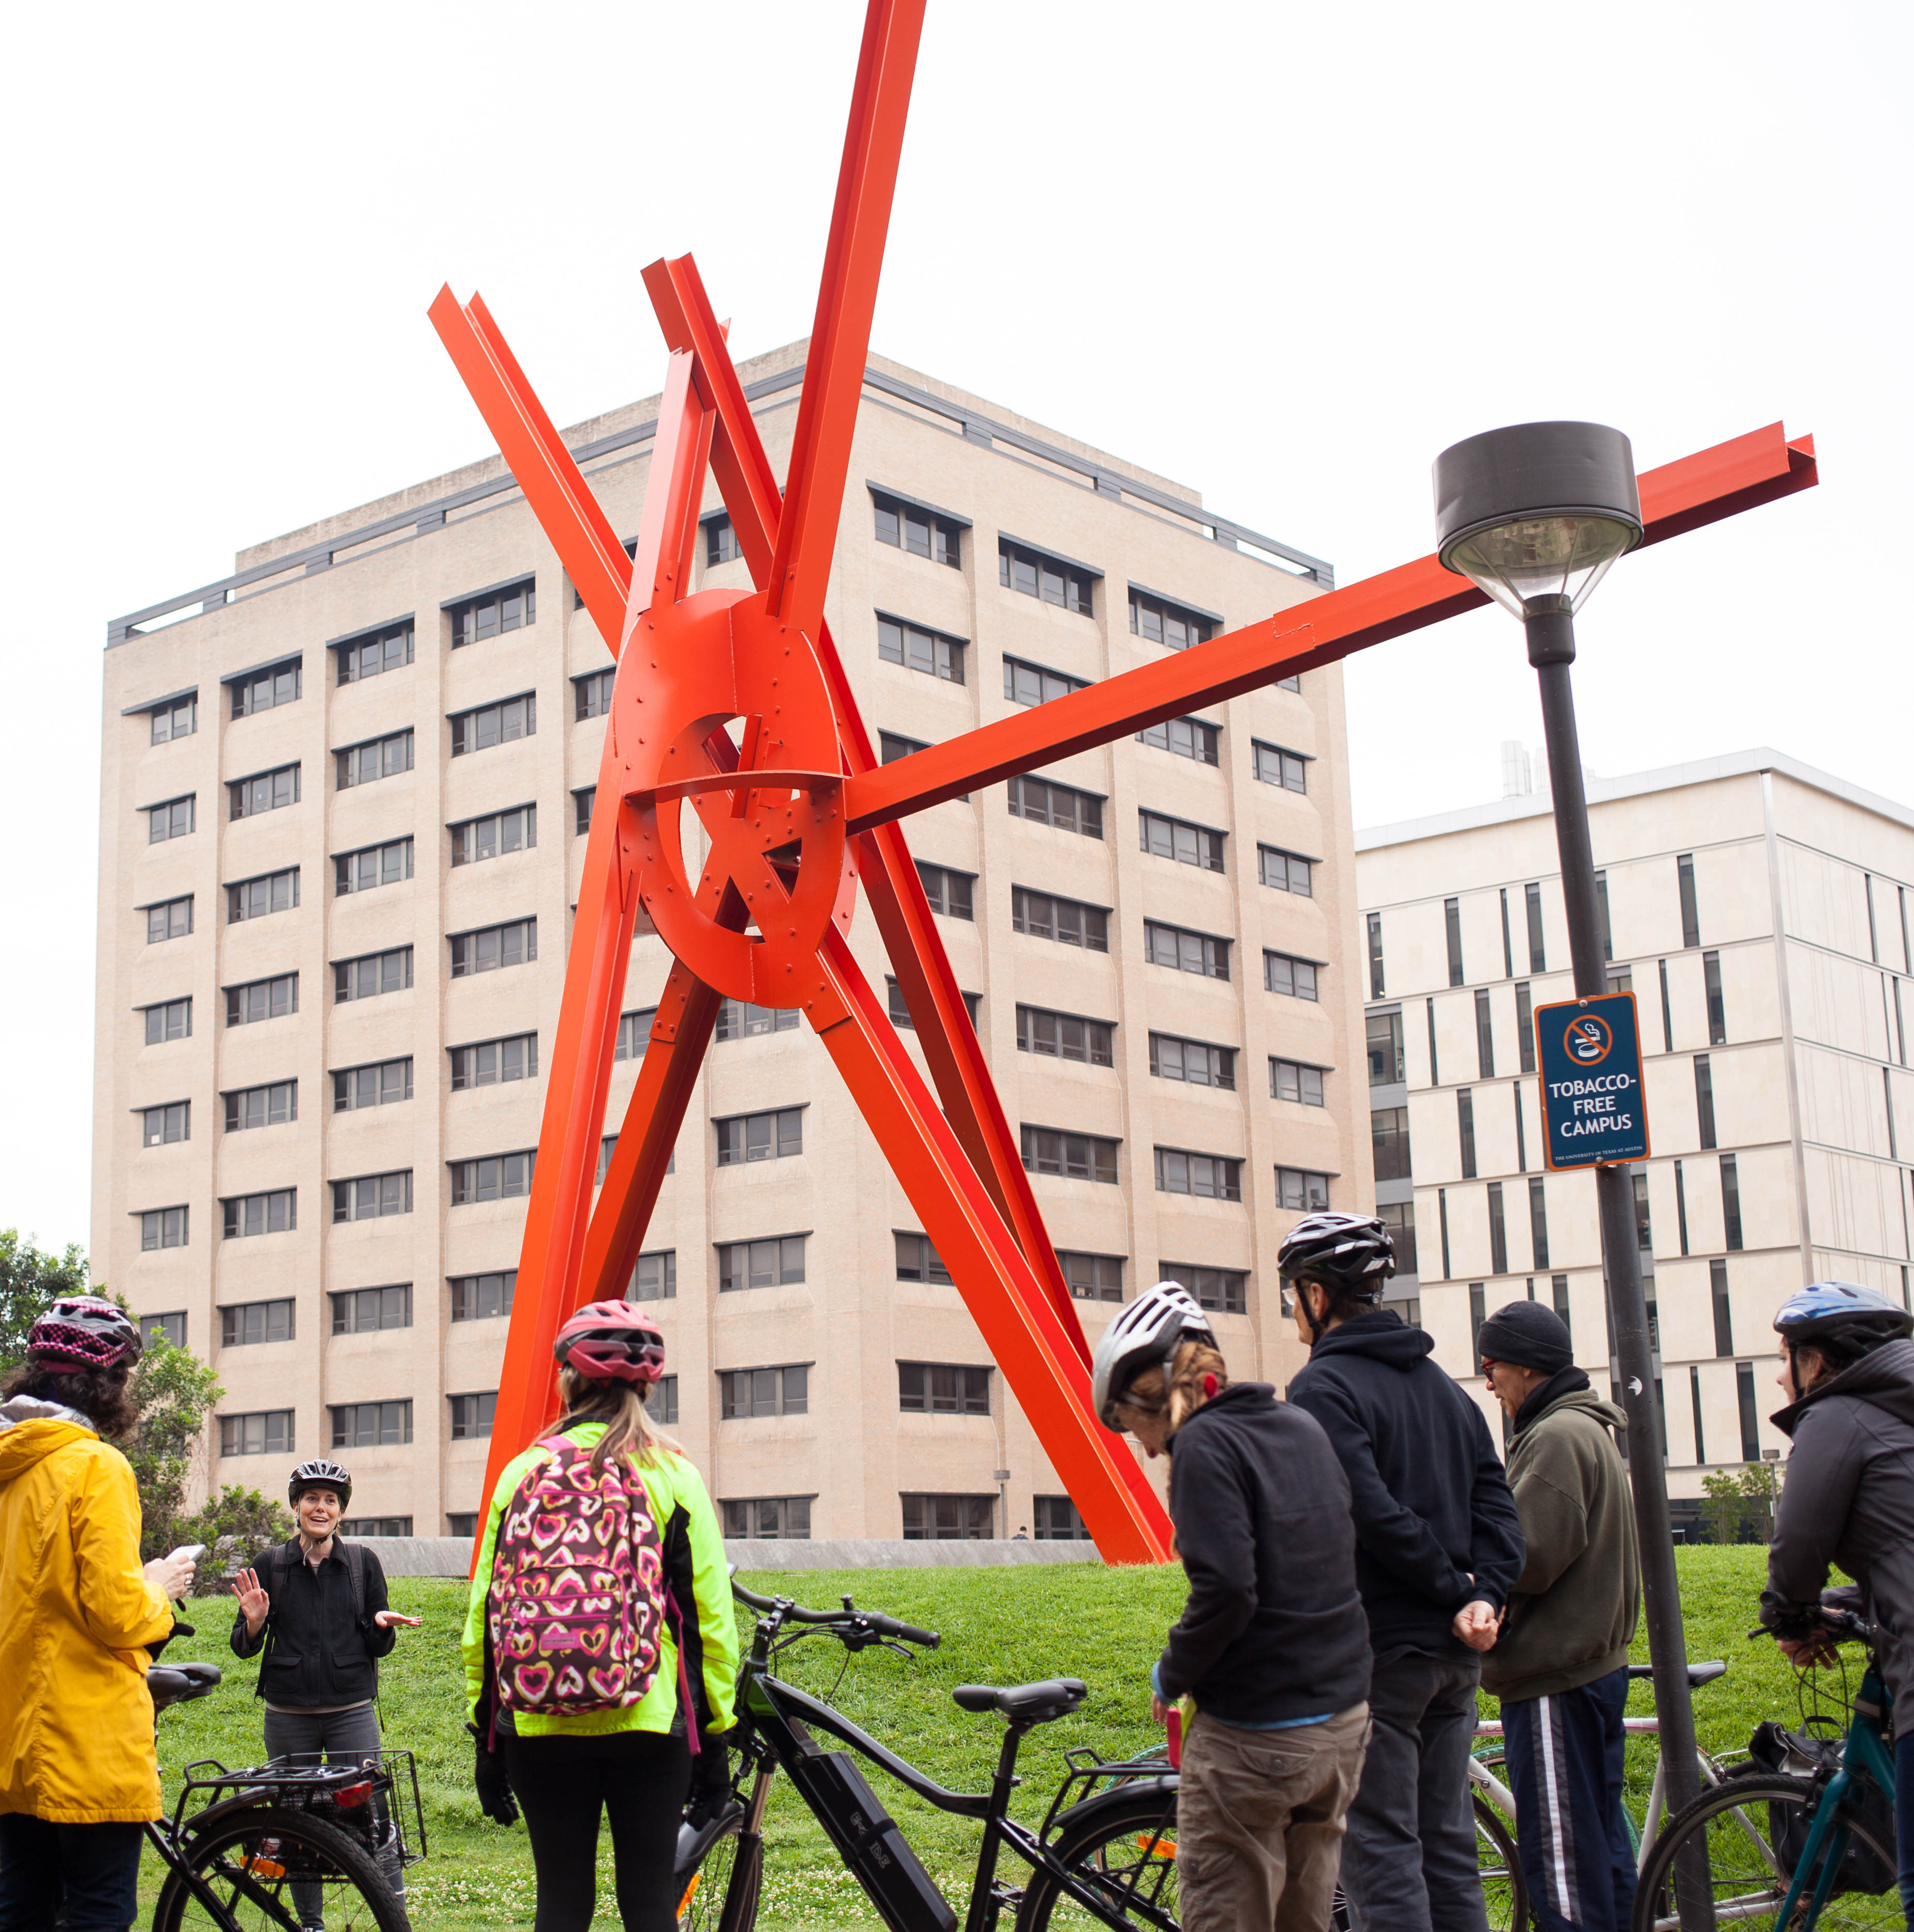 A group of people with bikes wear helmets and stand looking at Marc di Suvero's 